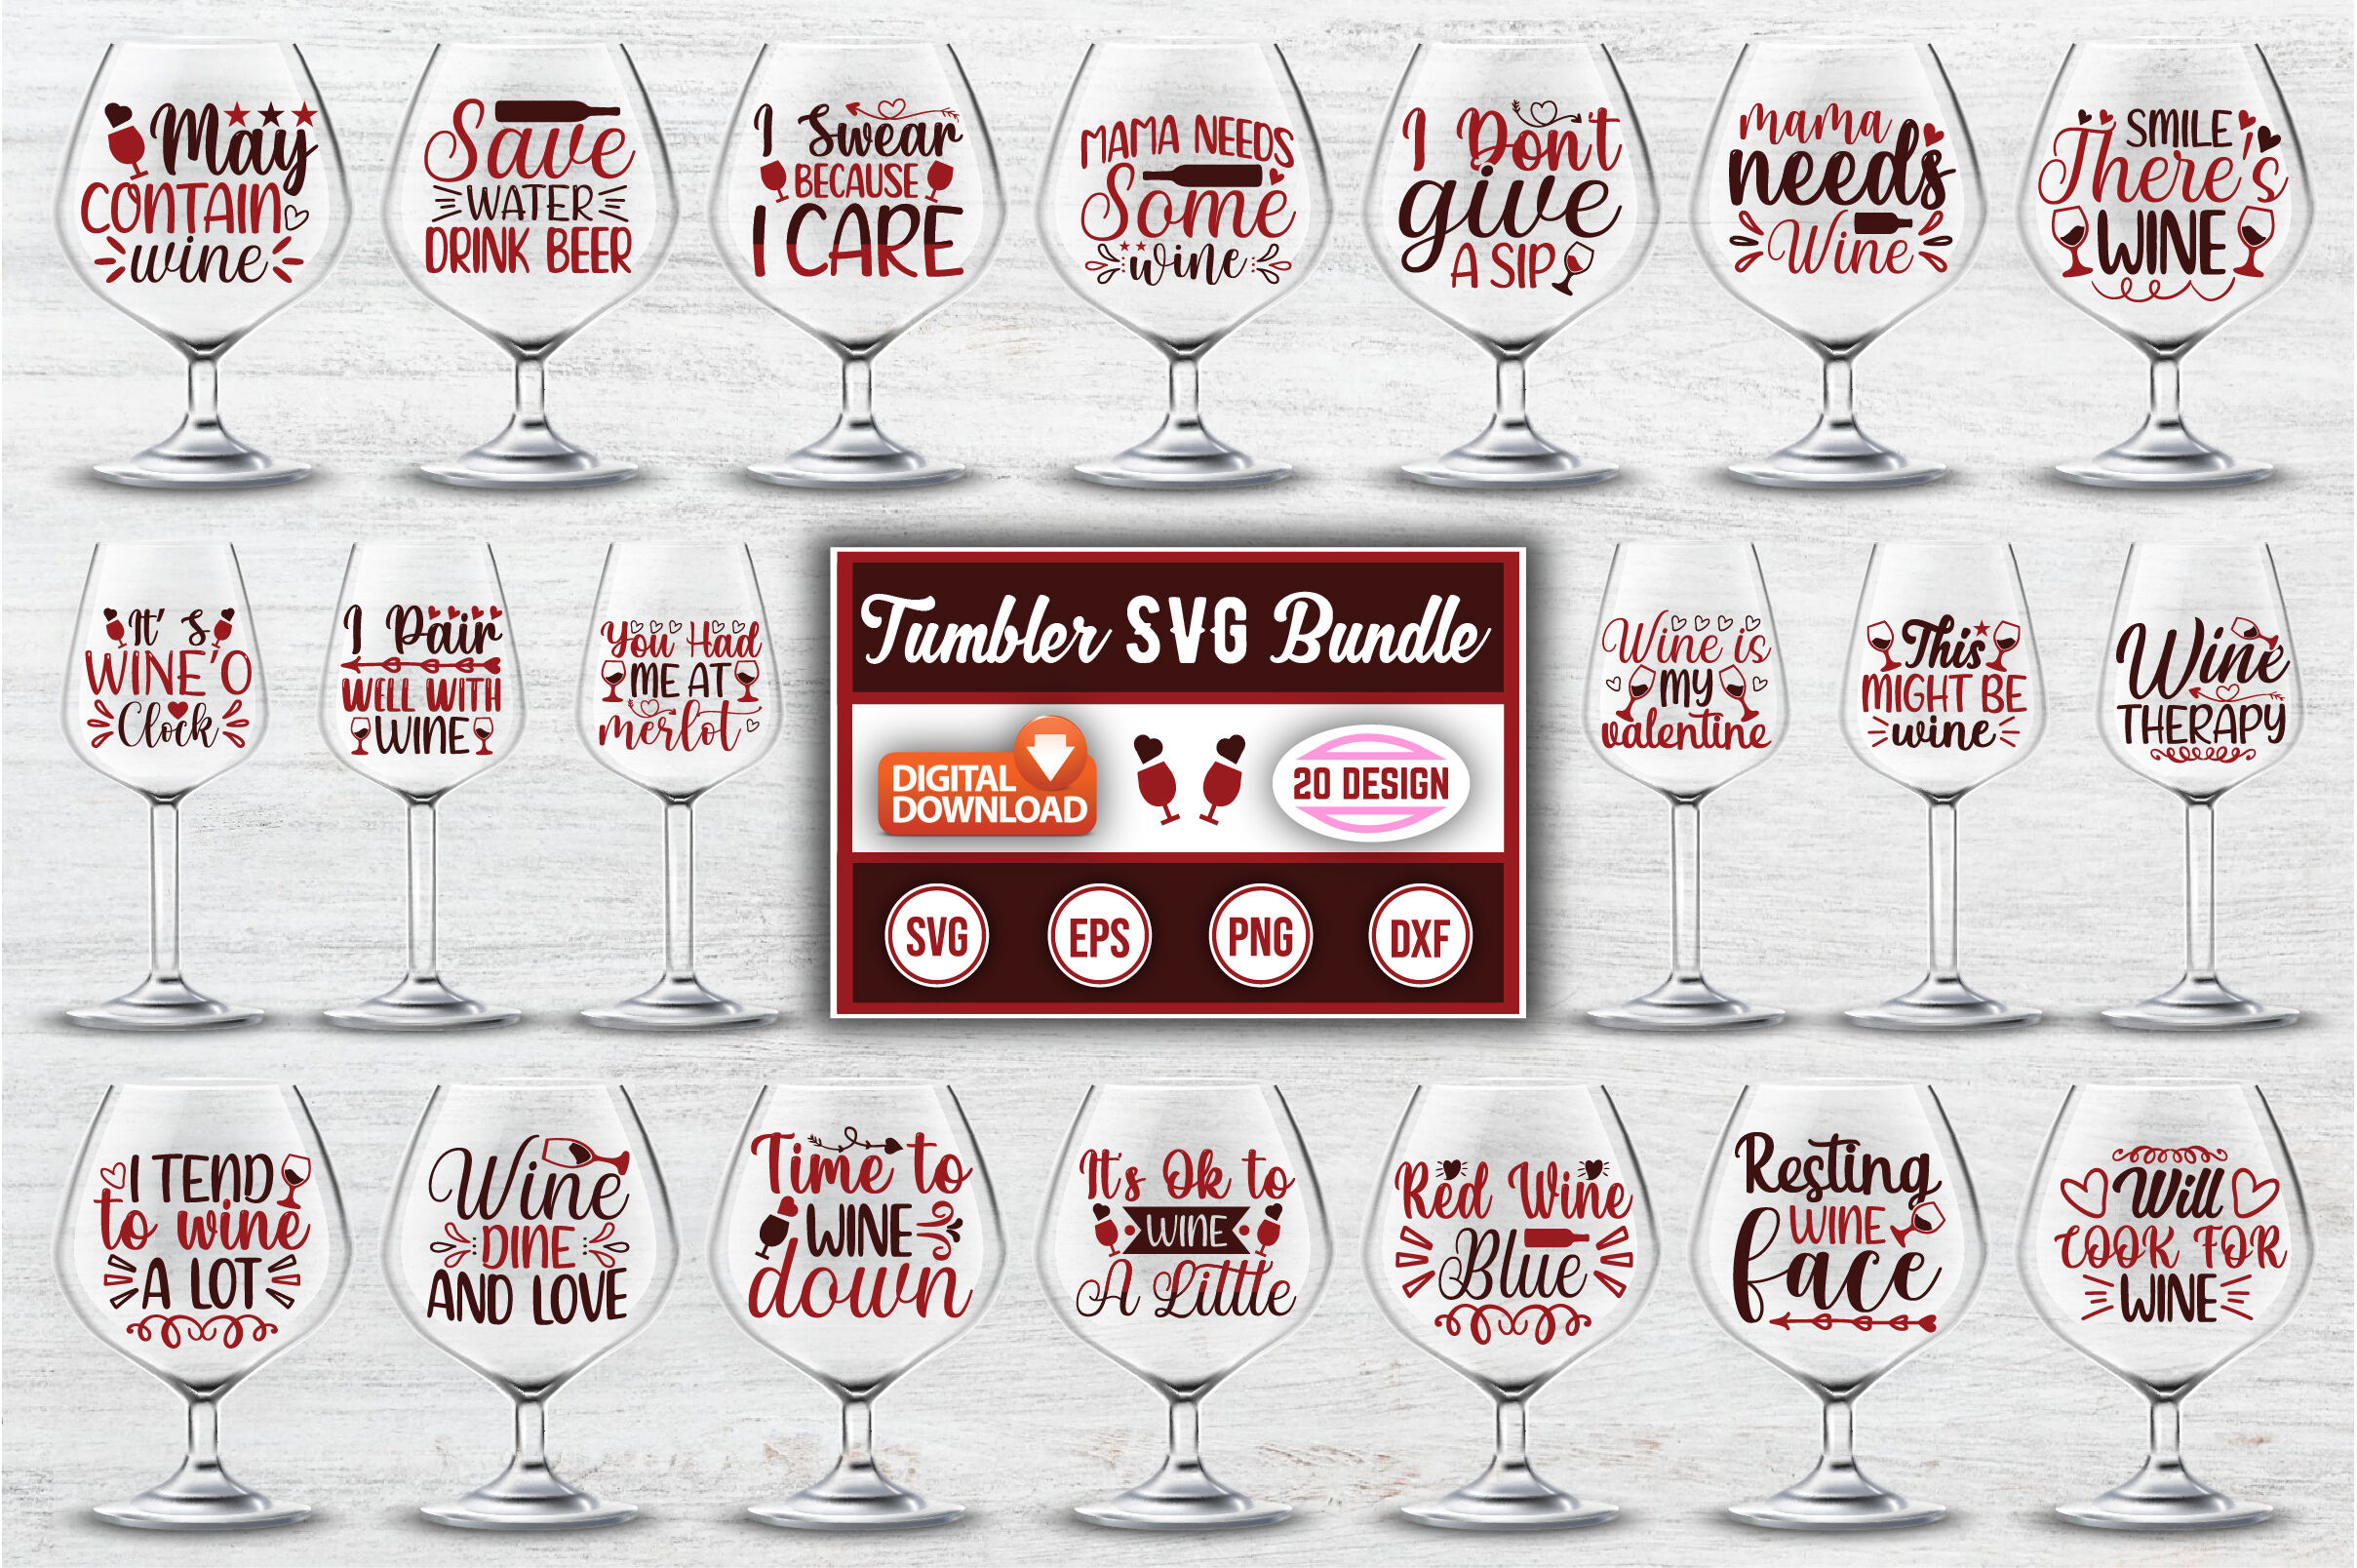 Custom Cute Quotes and Sayings Wine Glass - Engraved